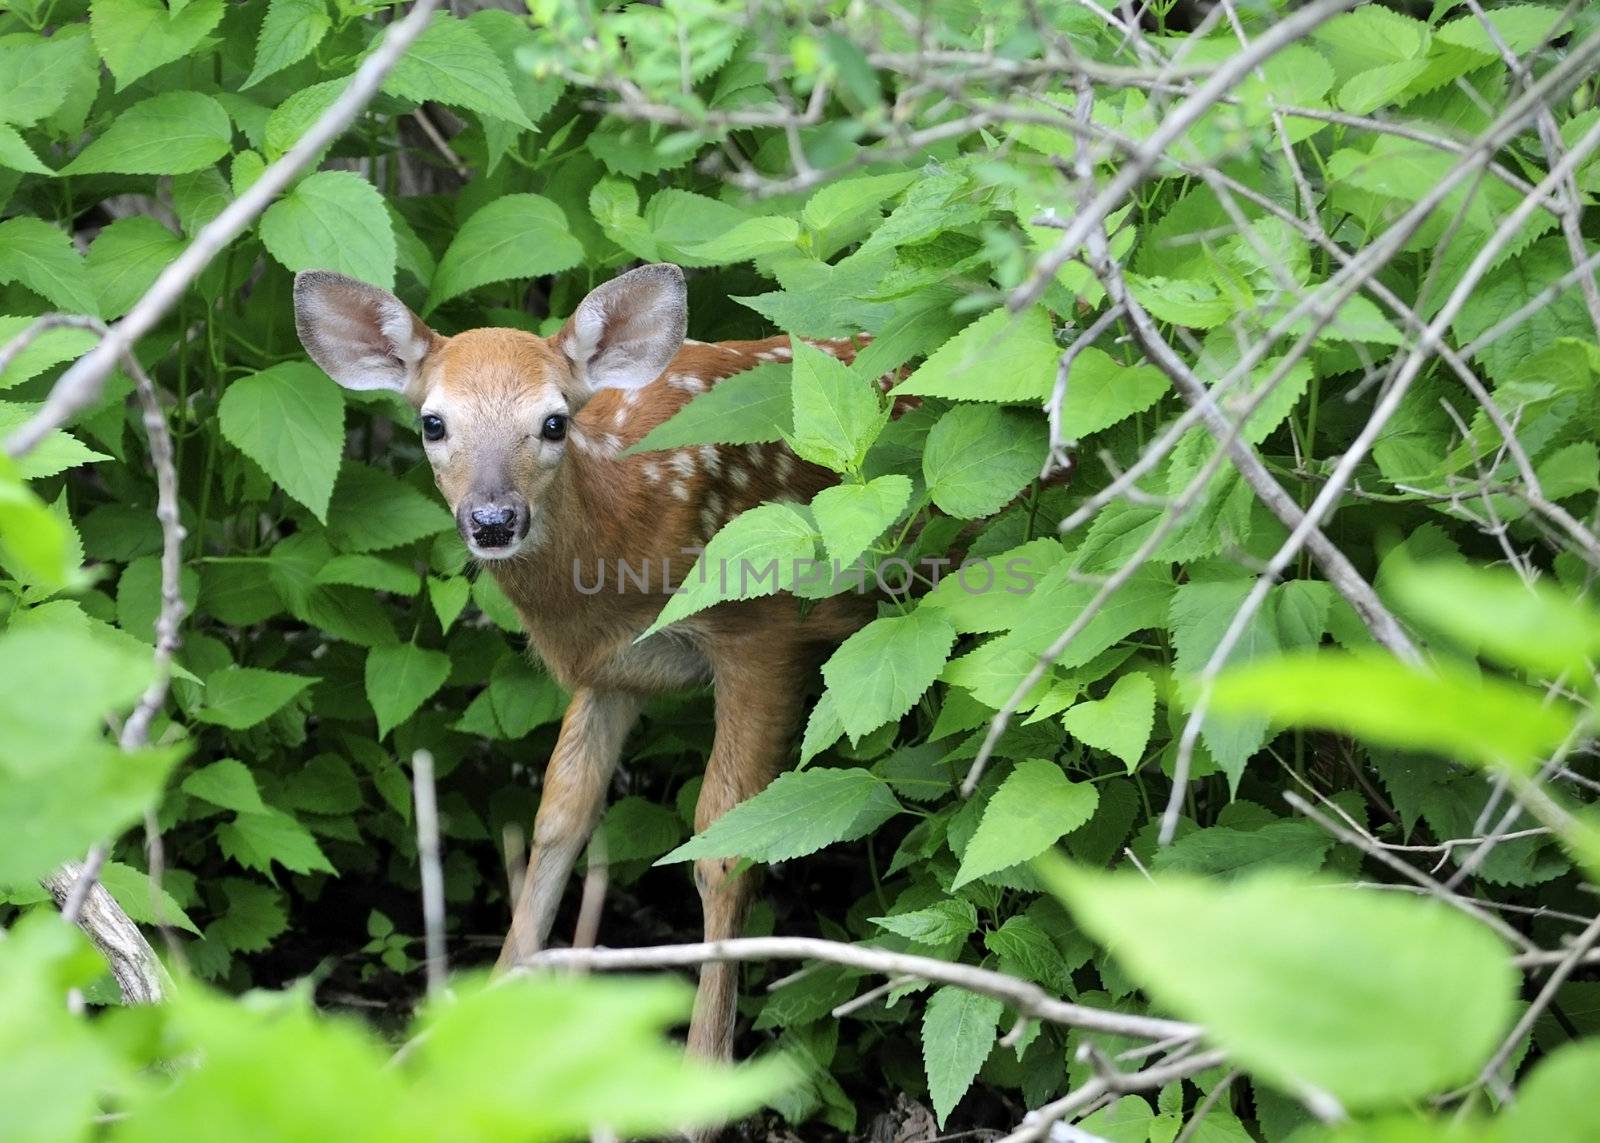 A whitetail deer fawn standing in a thicket